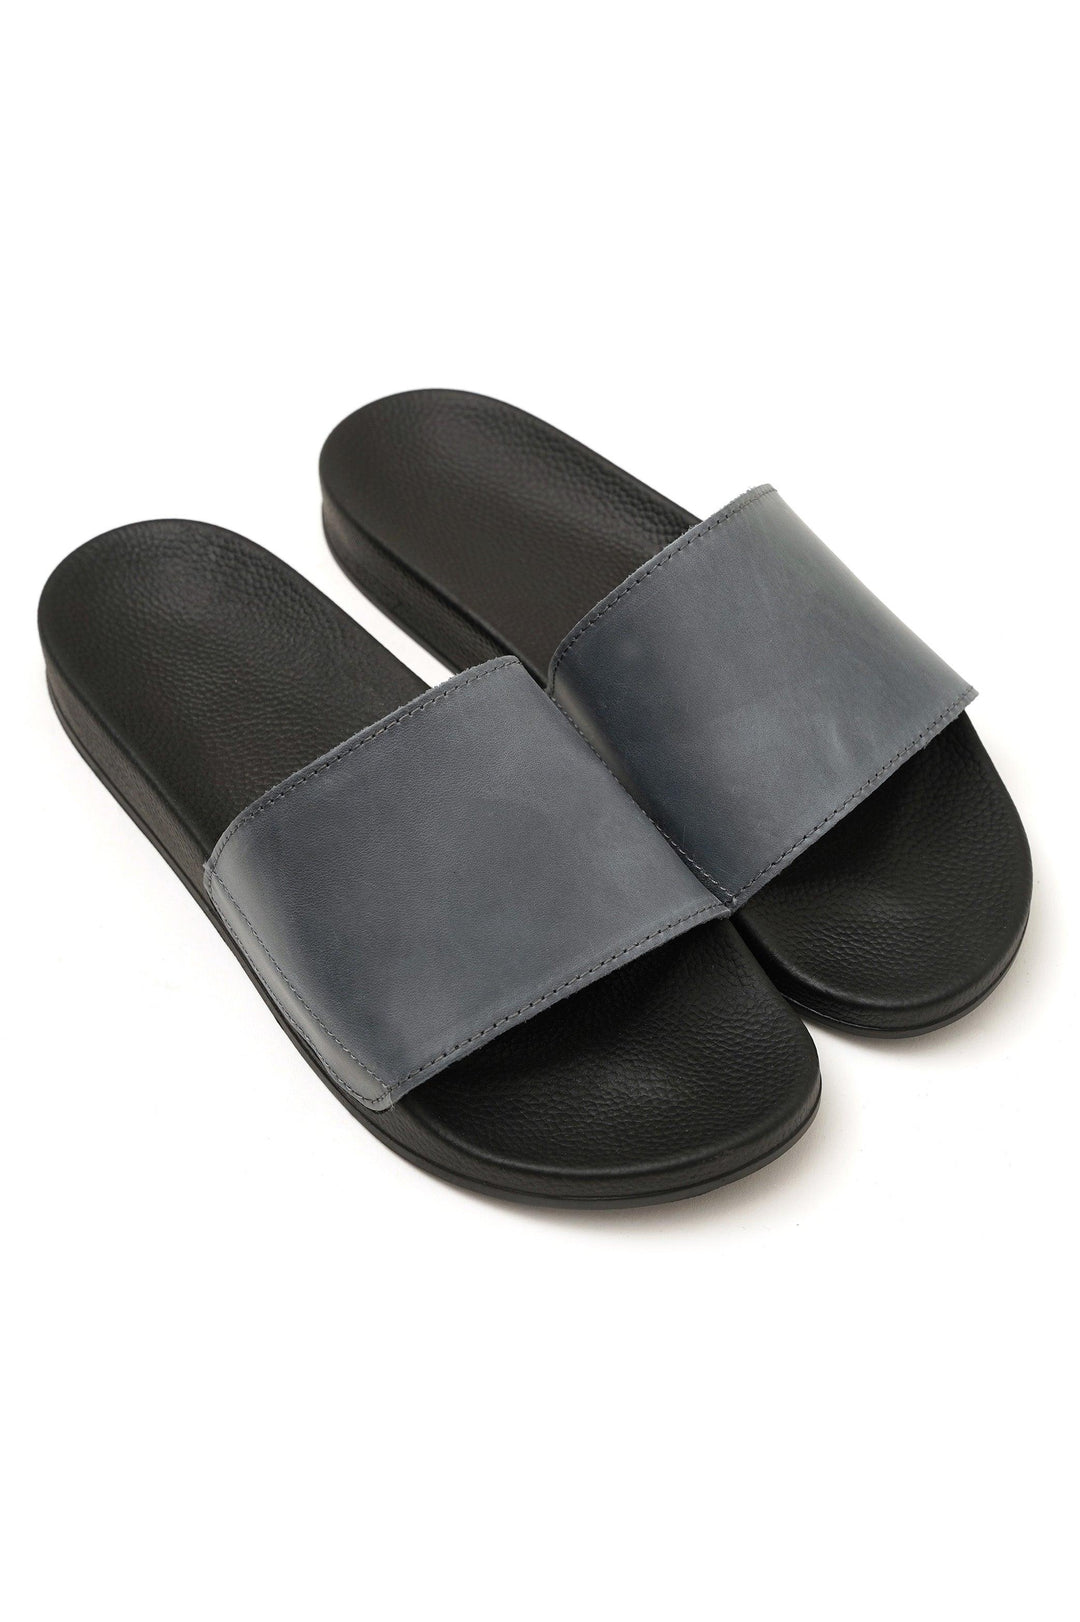 LEATHER SLIDES WITH FOAM SOLE - LEATHER SLIDES